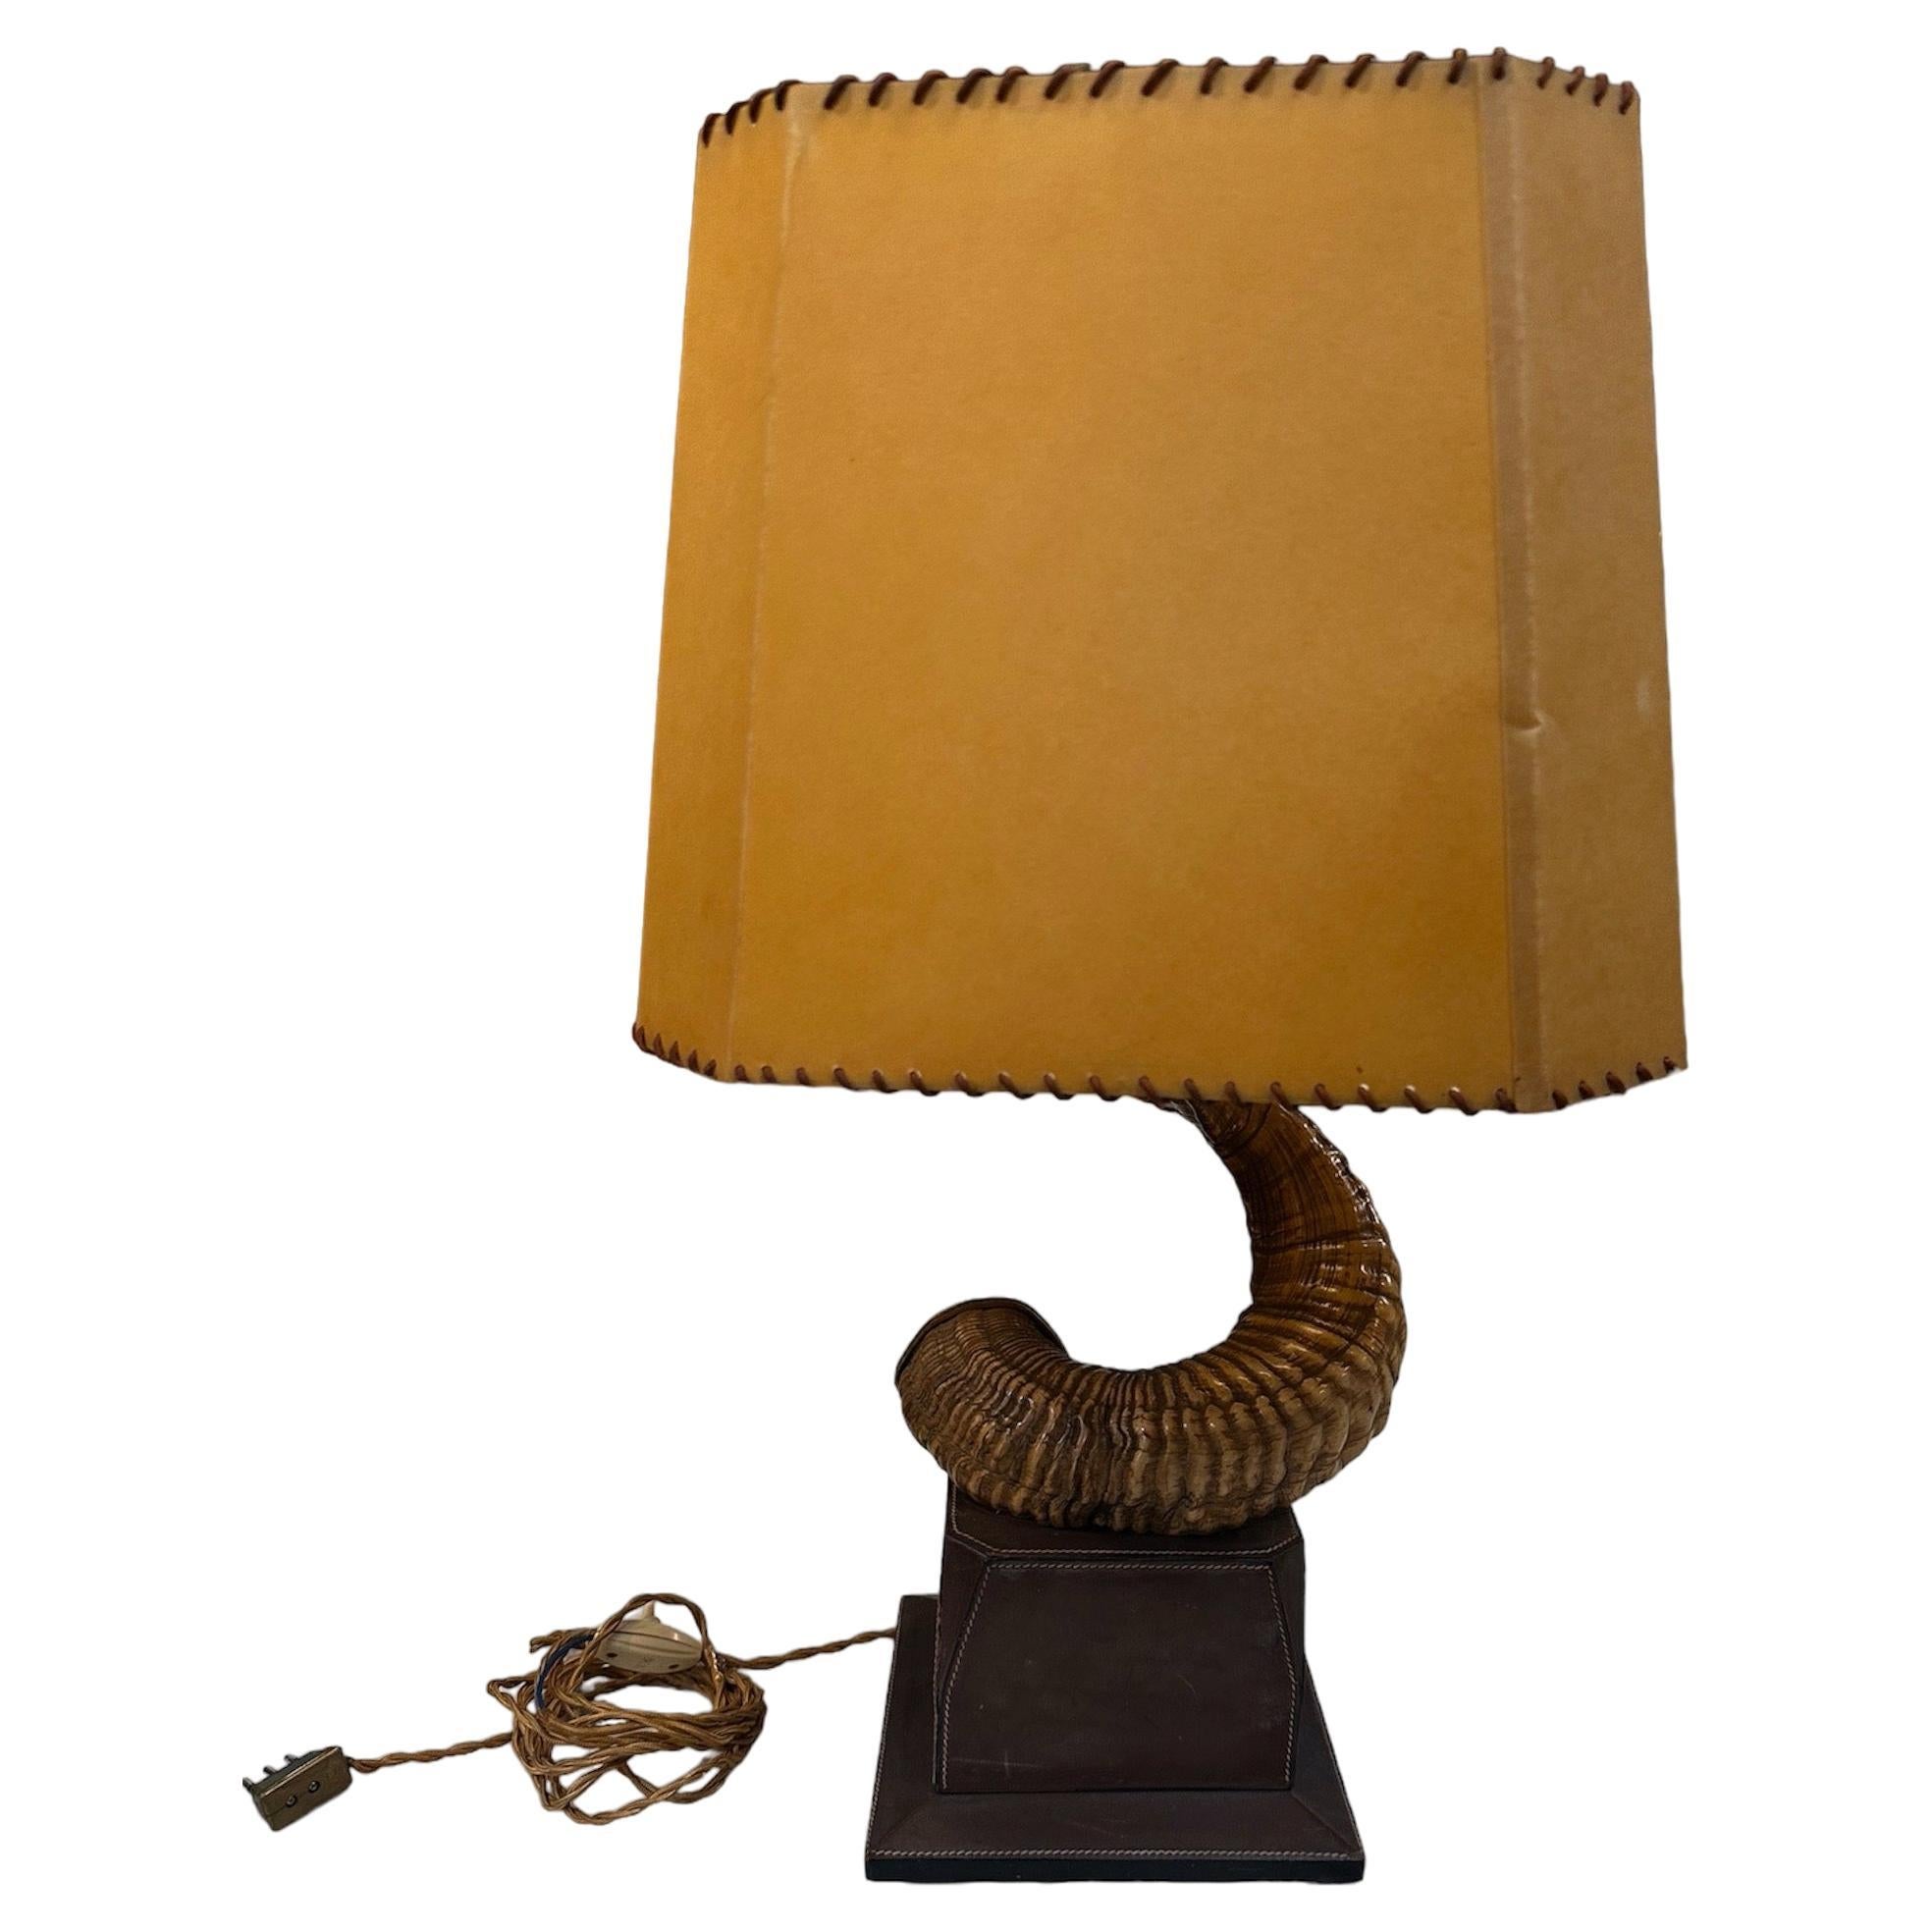 Vintage Italian Gucci Horn Table Lamp 1970s For Sale